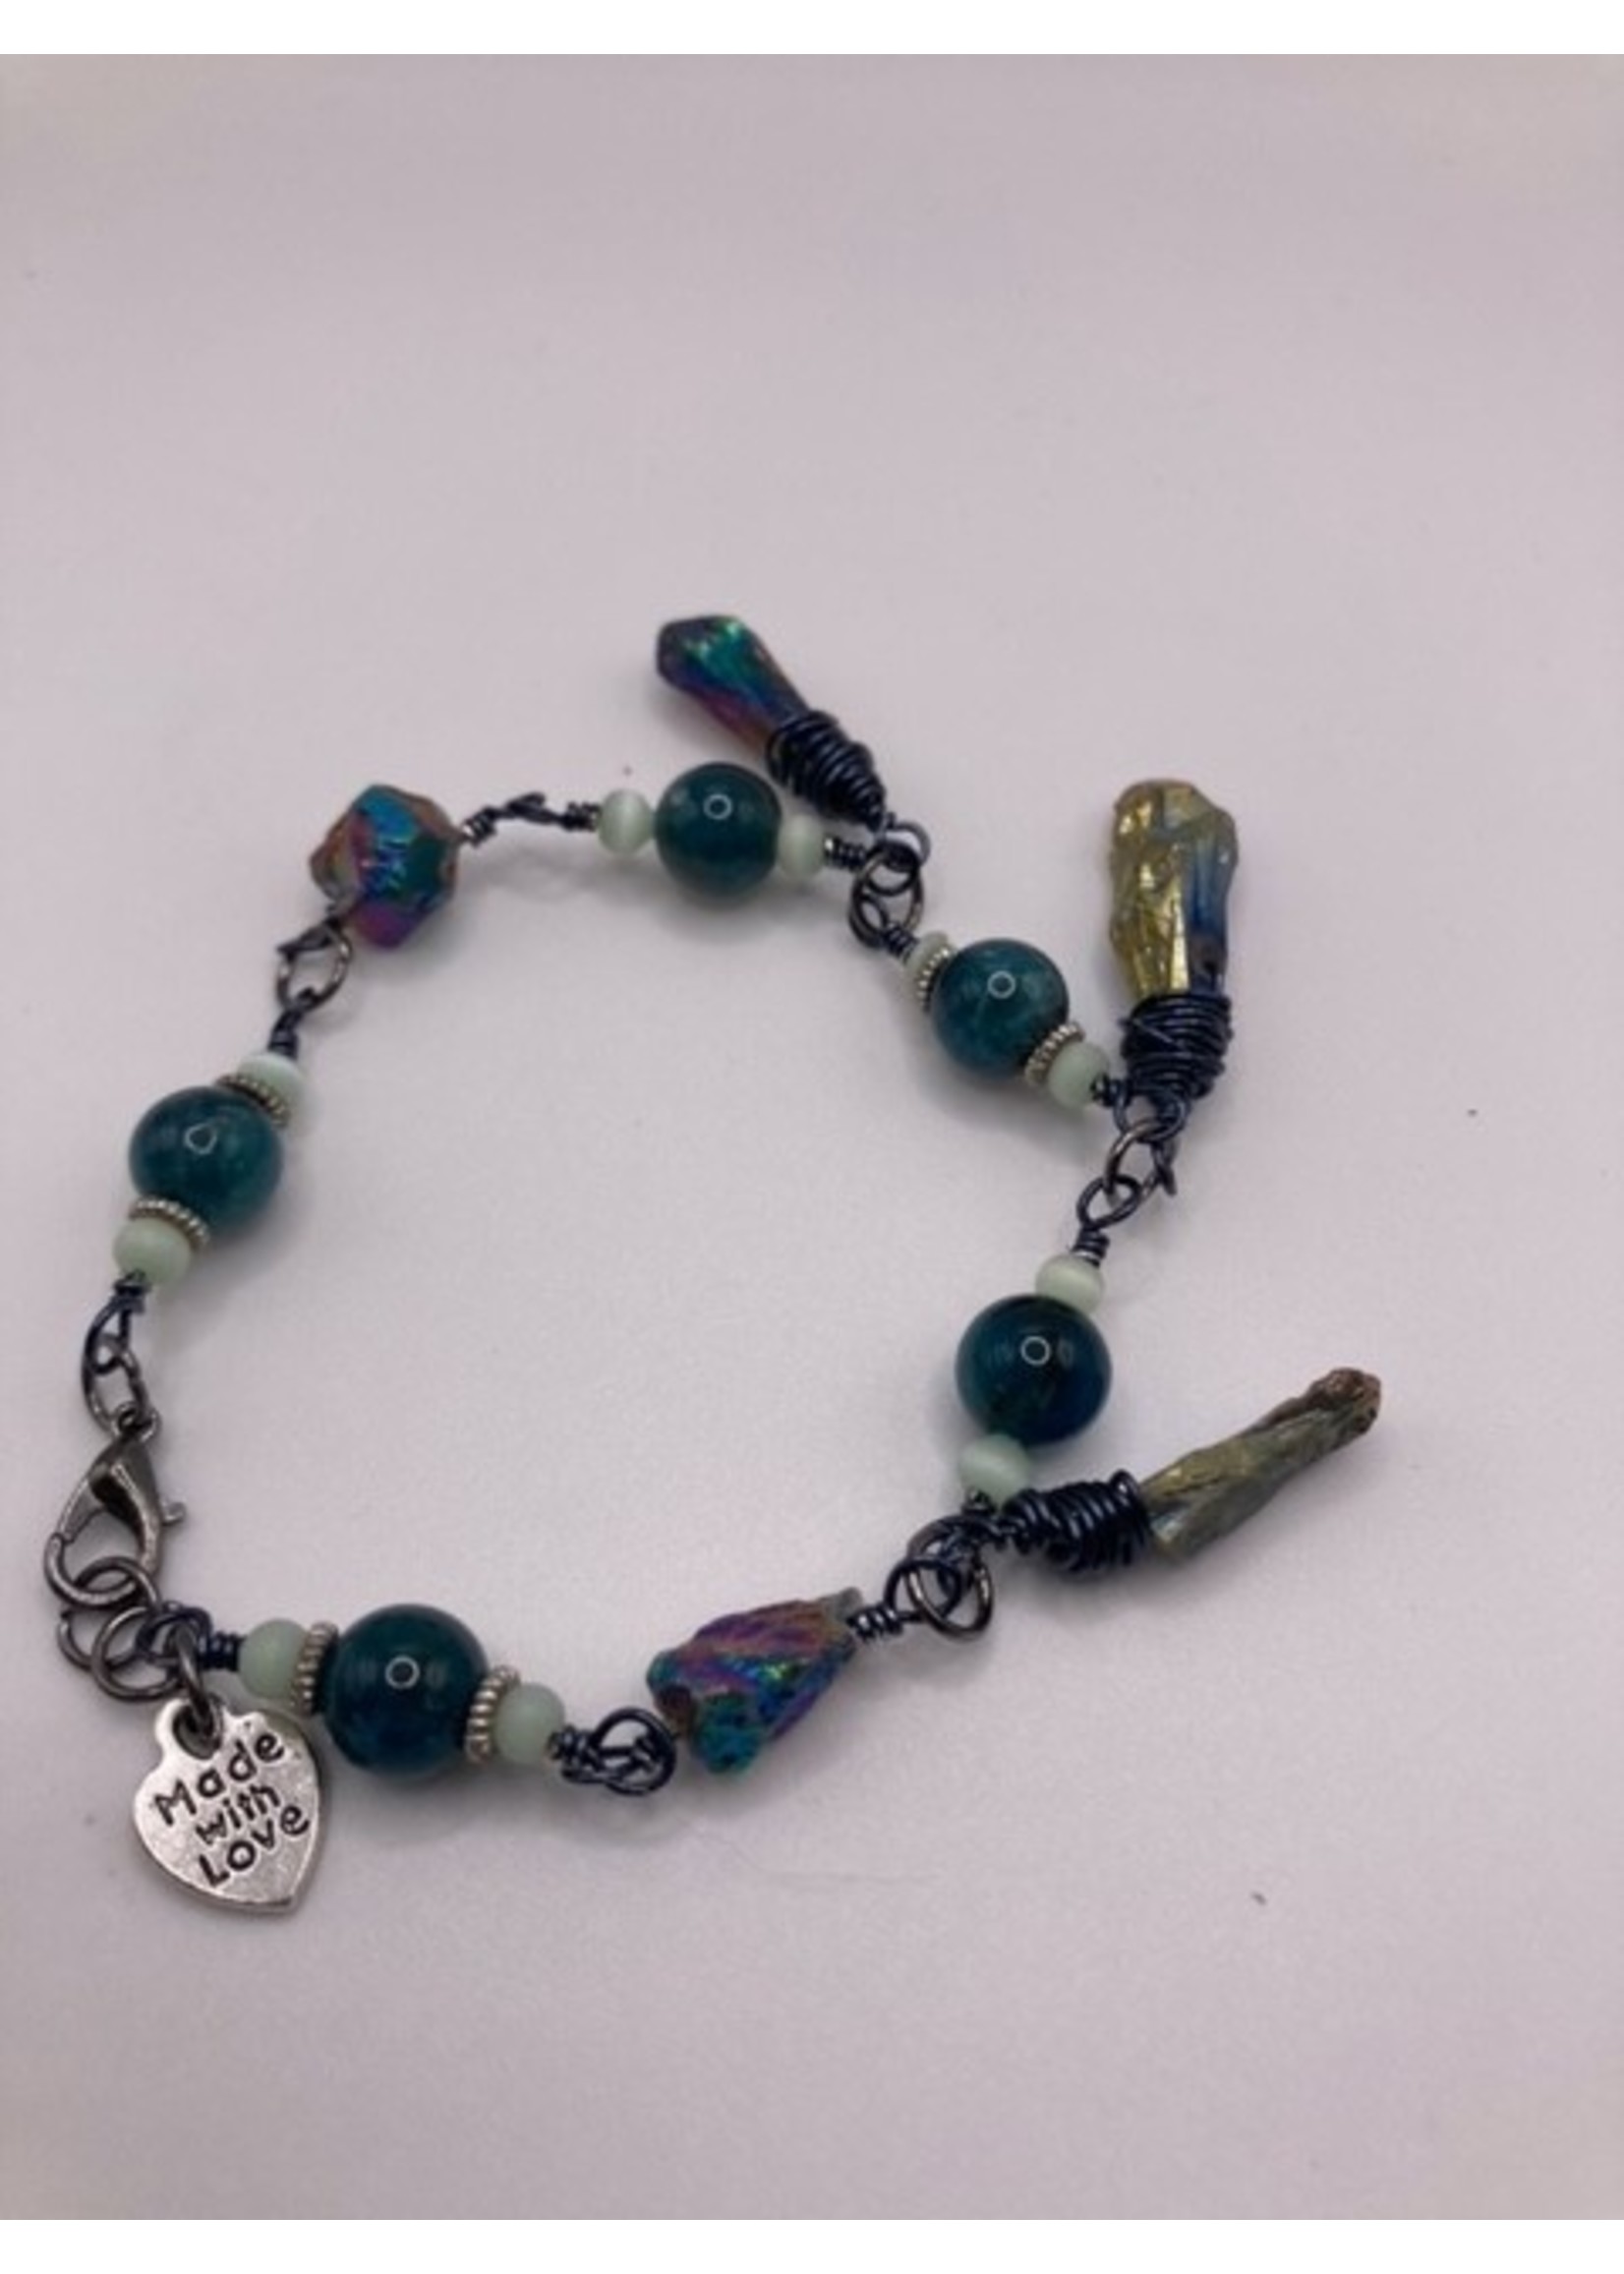 Our Twisted Dahlia Teal and Turquoise Druze  Bracelet